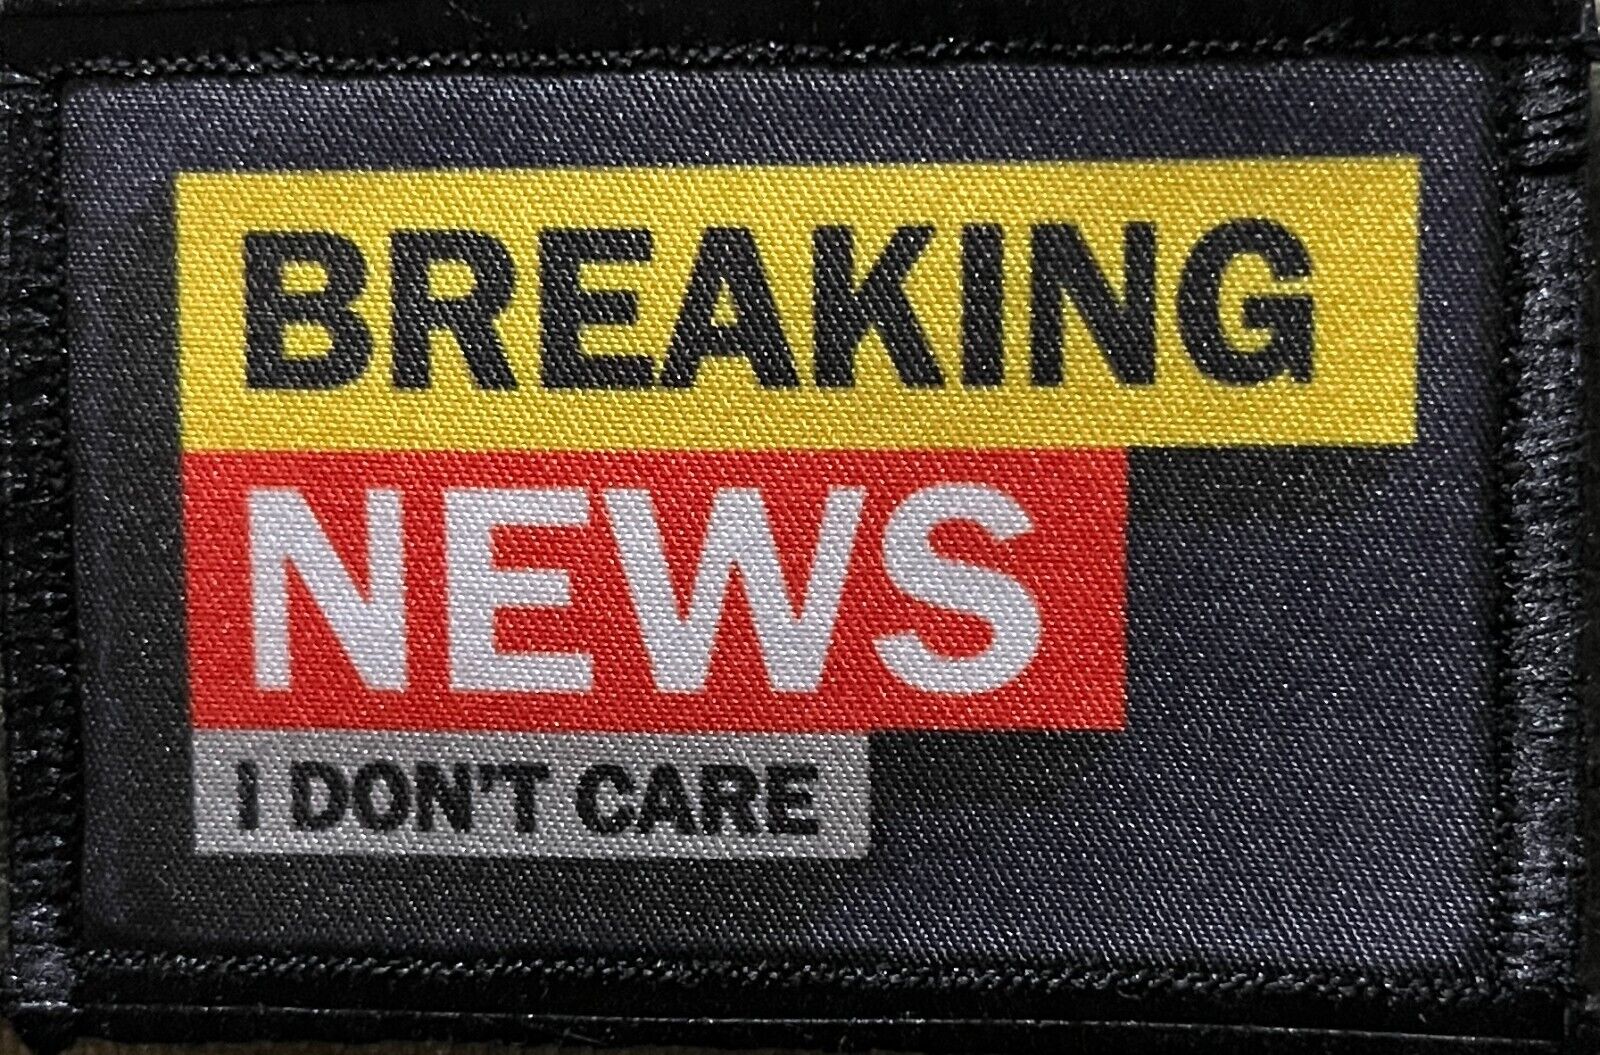 Breaking News I Don't Care Morale Patch Military Tactical